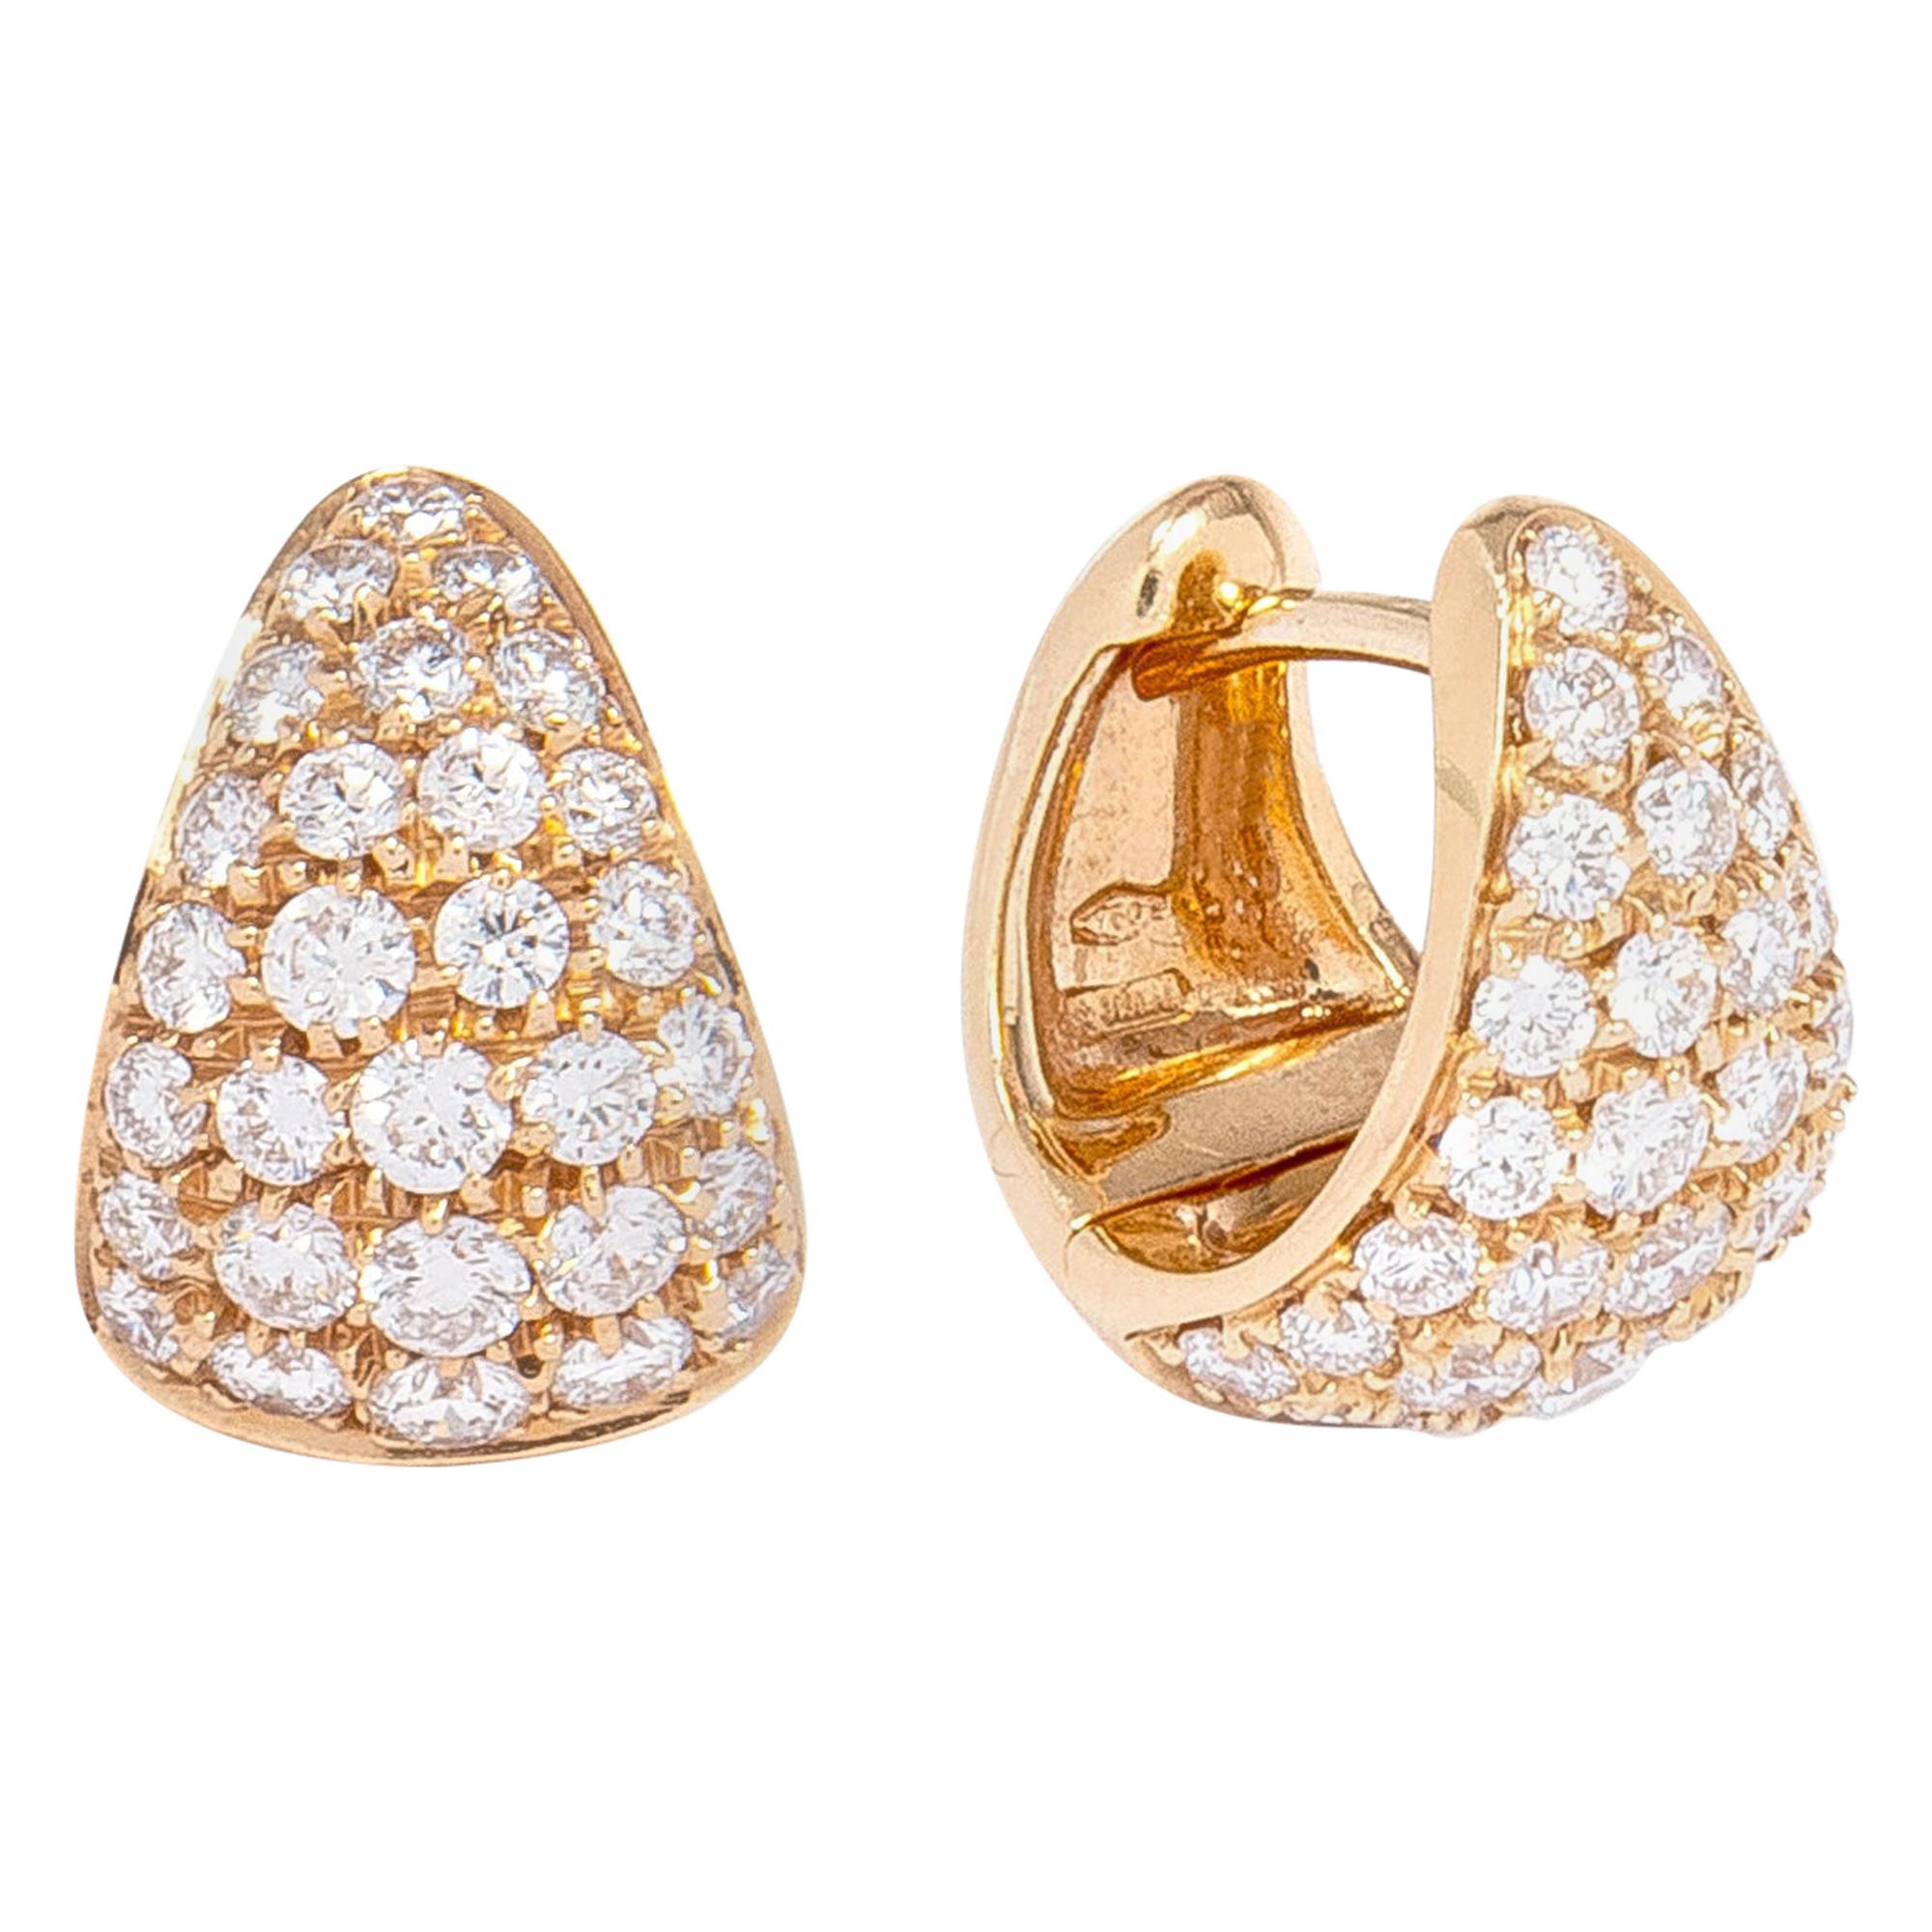 Red Gold Earrings with Diamonds 1.16 Carat